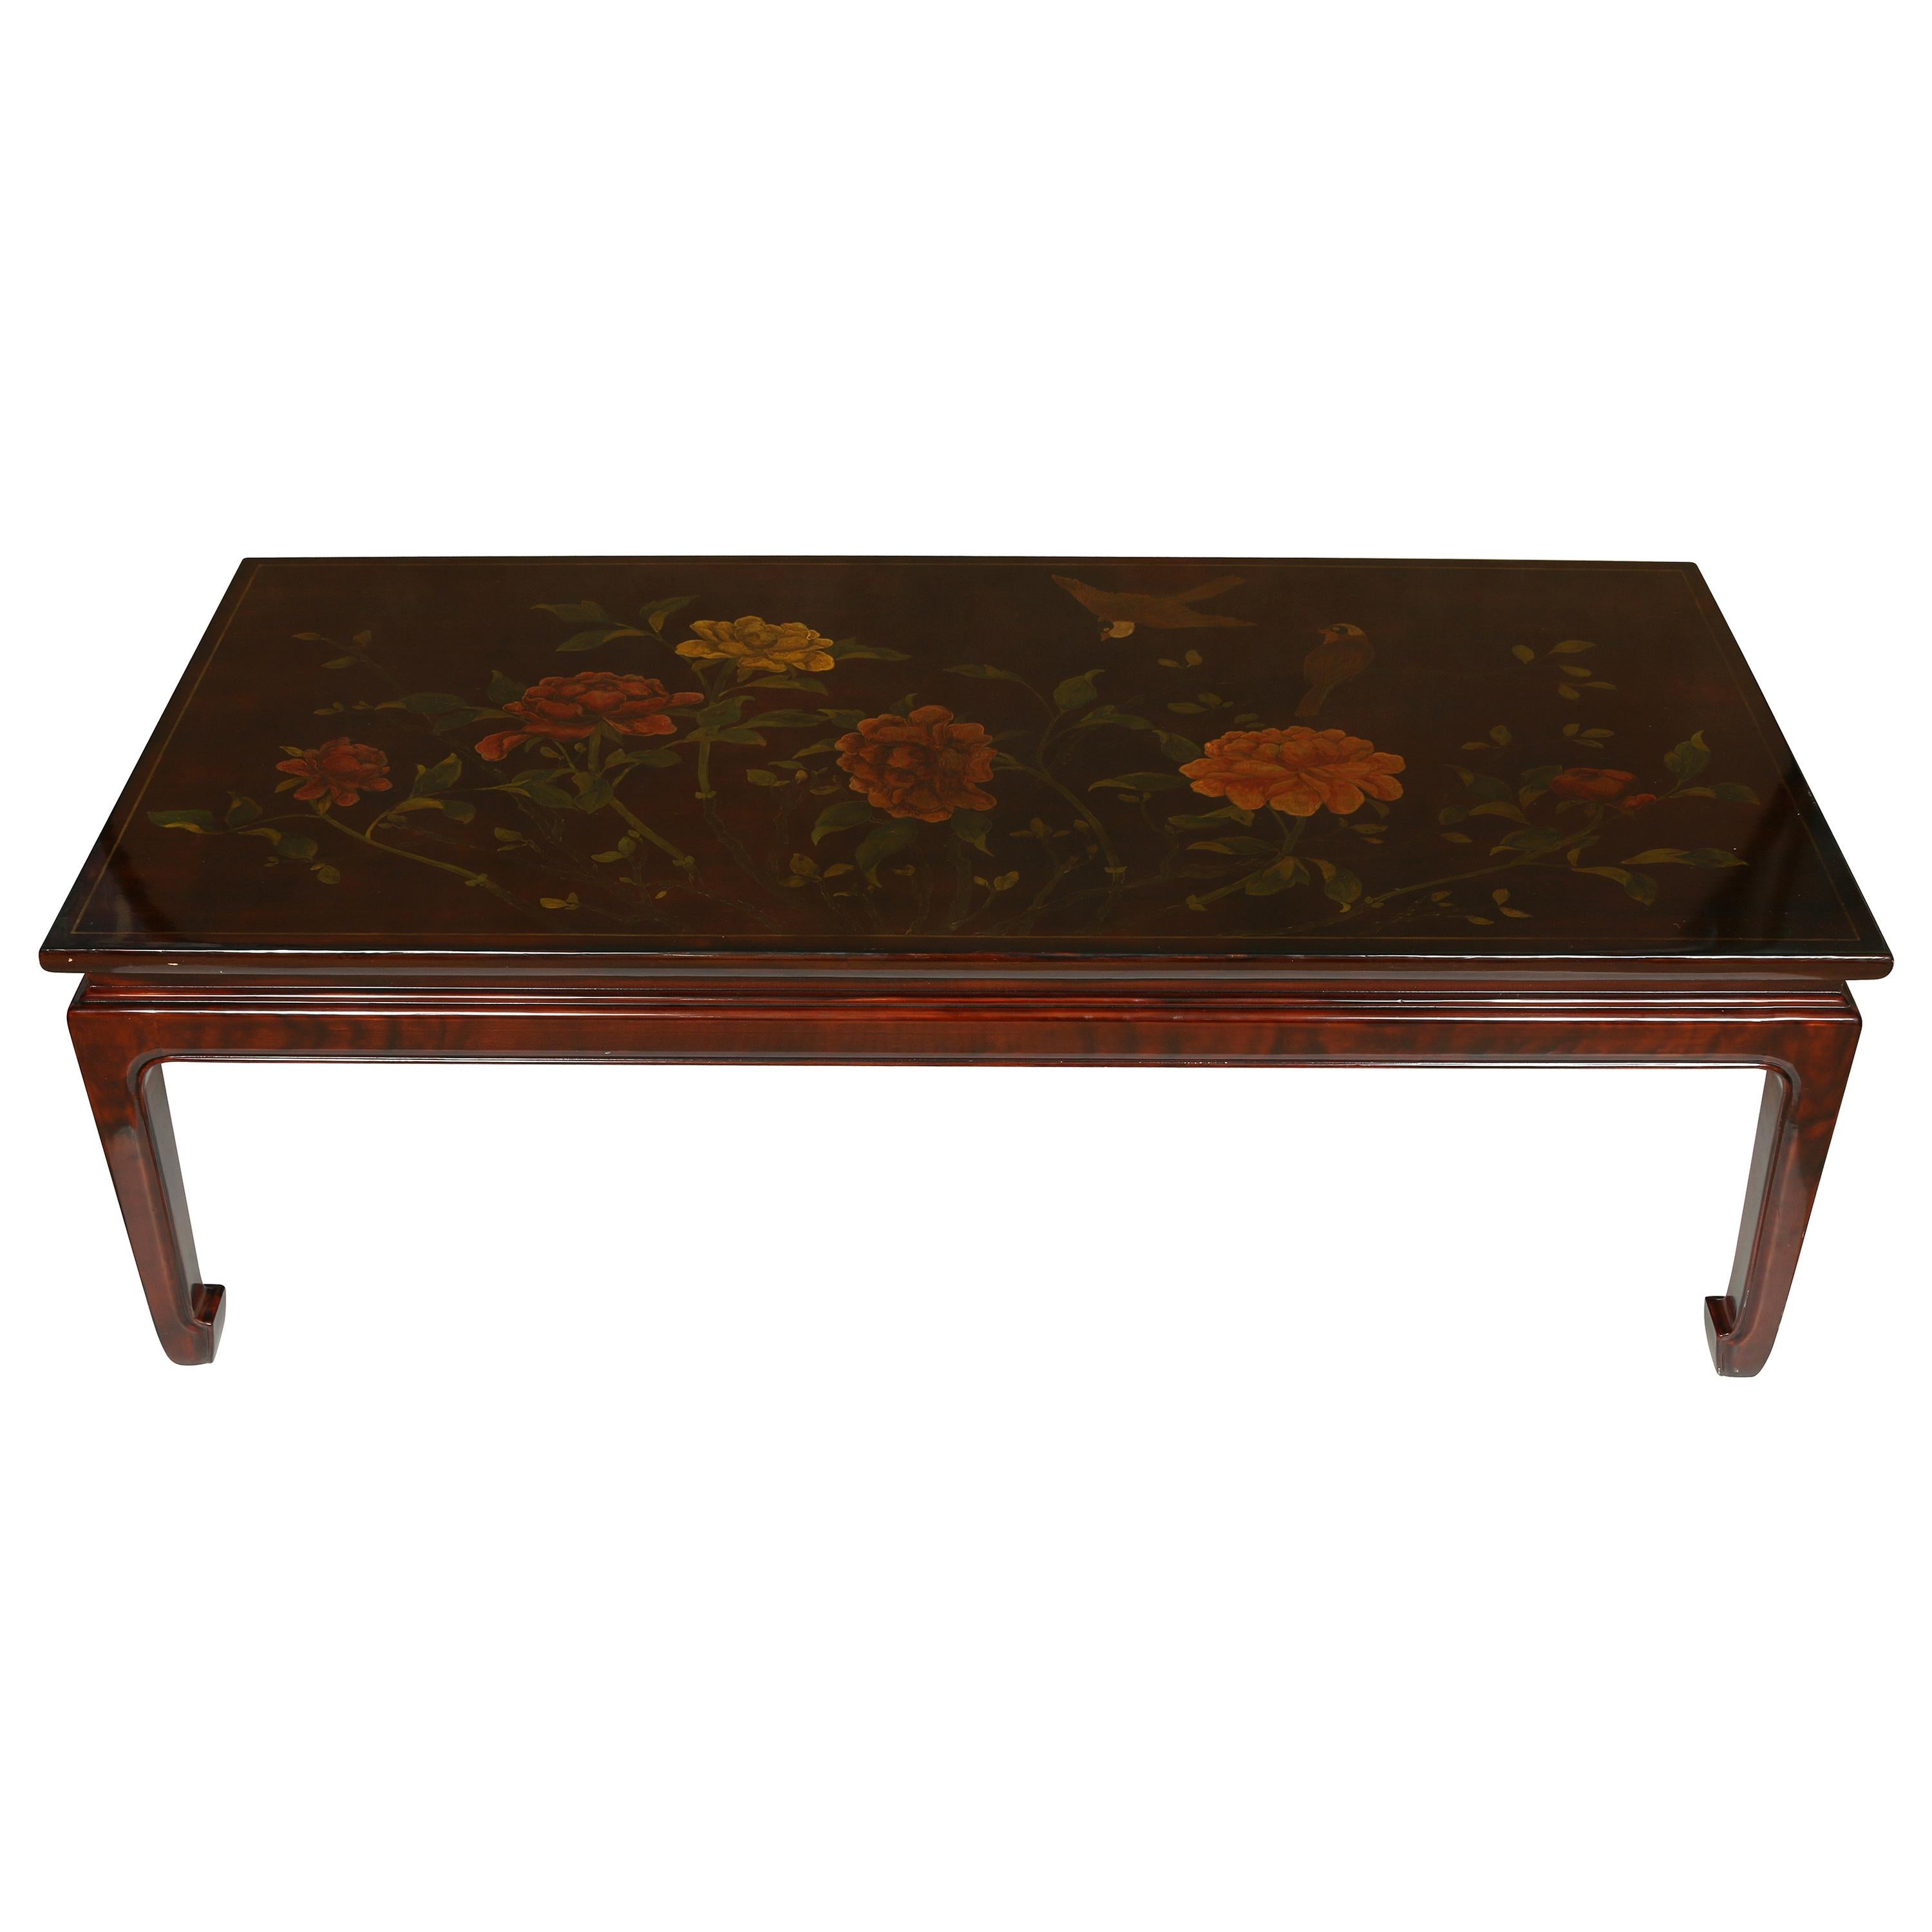 GRACIE Chinese Style Coffee Table with Floral Decoration